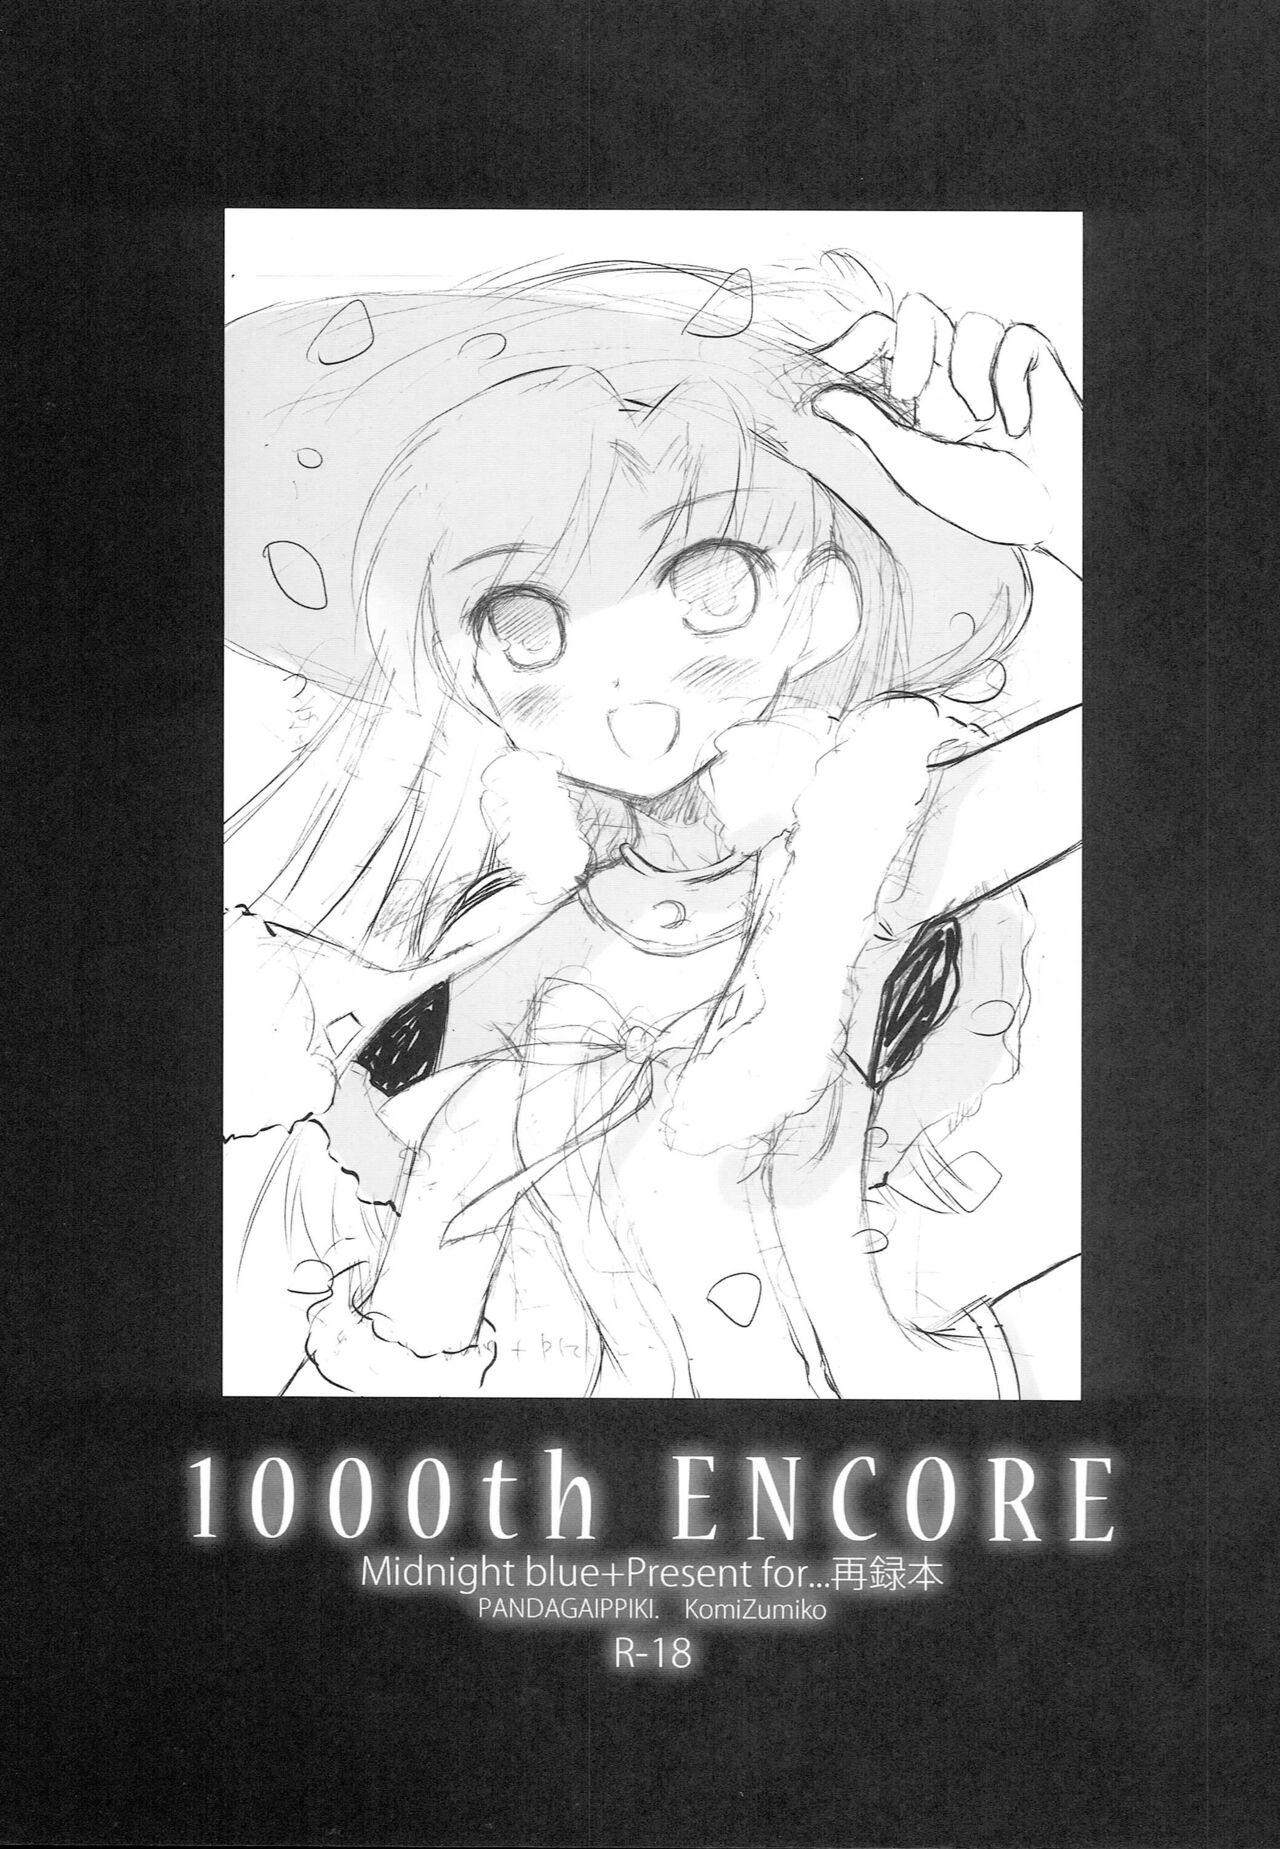 Maid 1000th ENCORE - The idolmaster Blow Job Porn - Picture 2